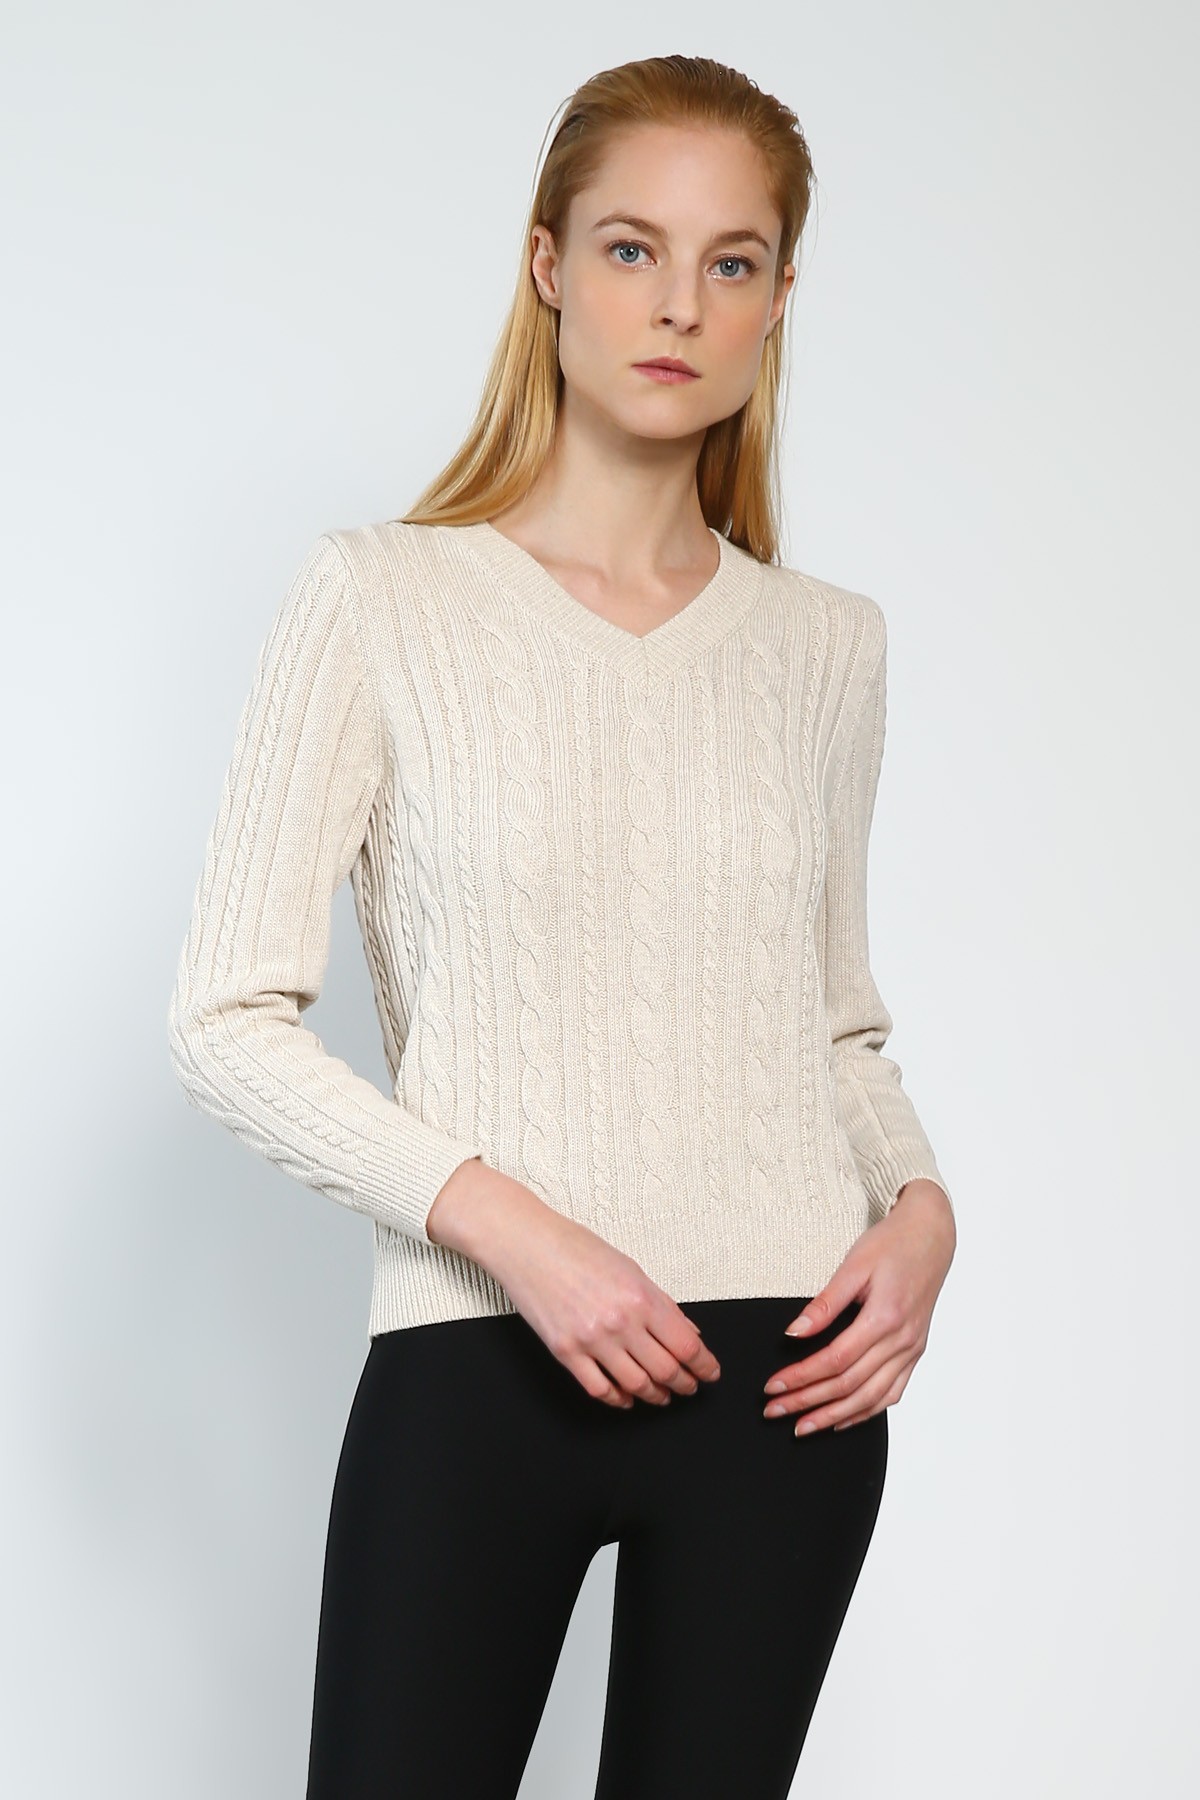 Classic Ladies V-neck Knitted Top 100% Cotton